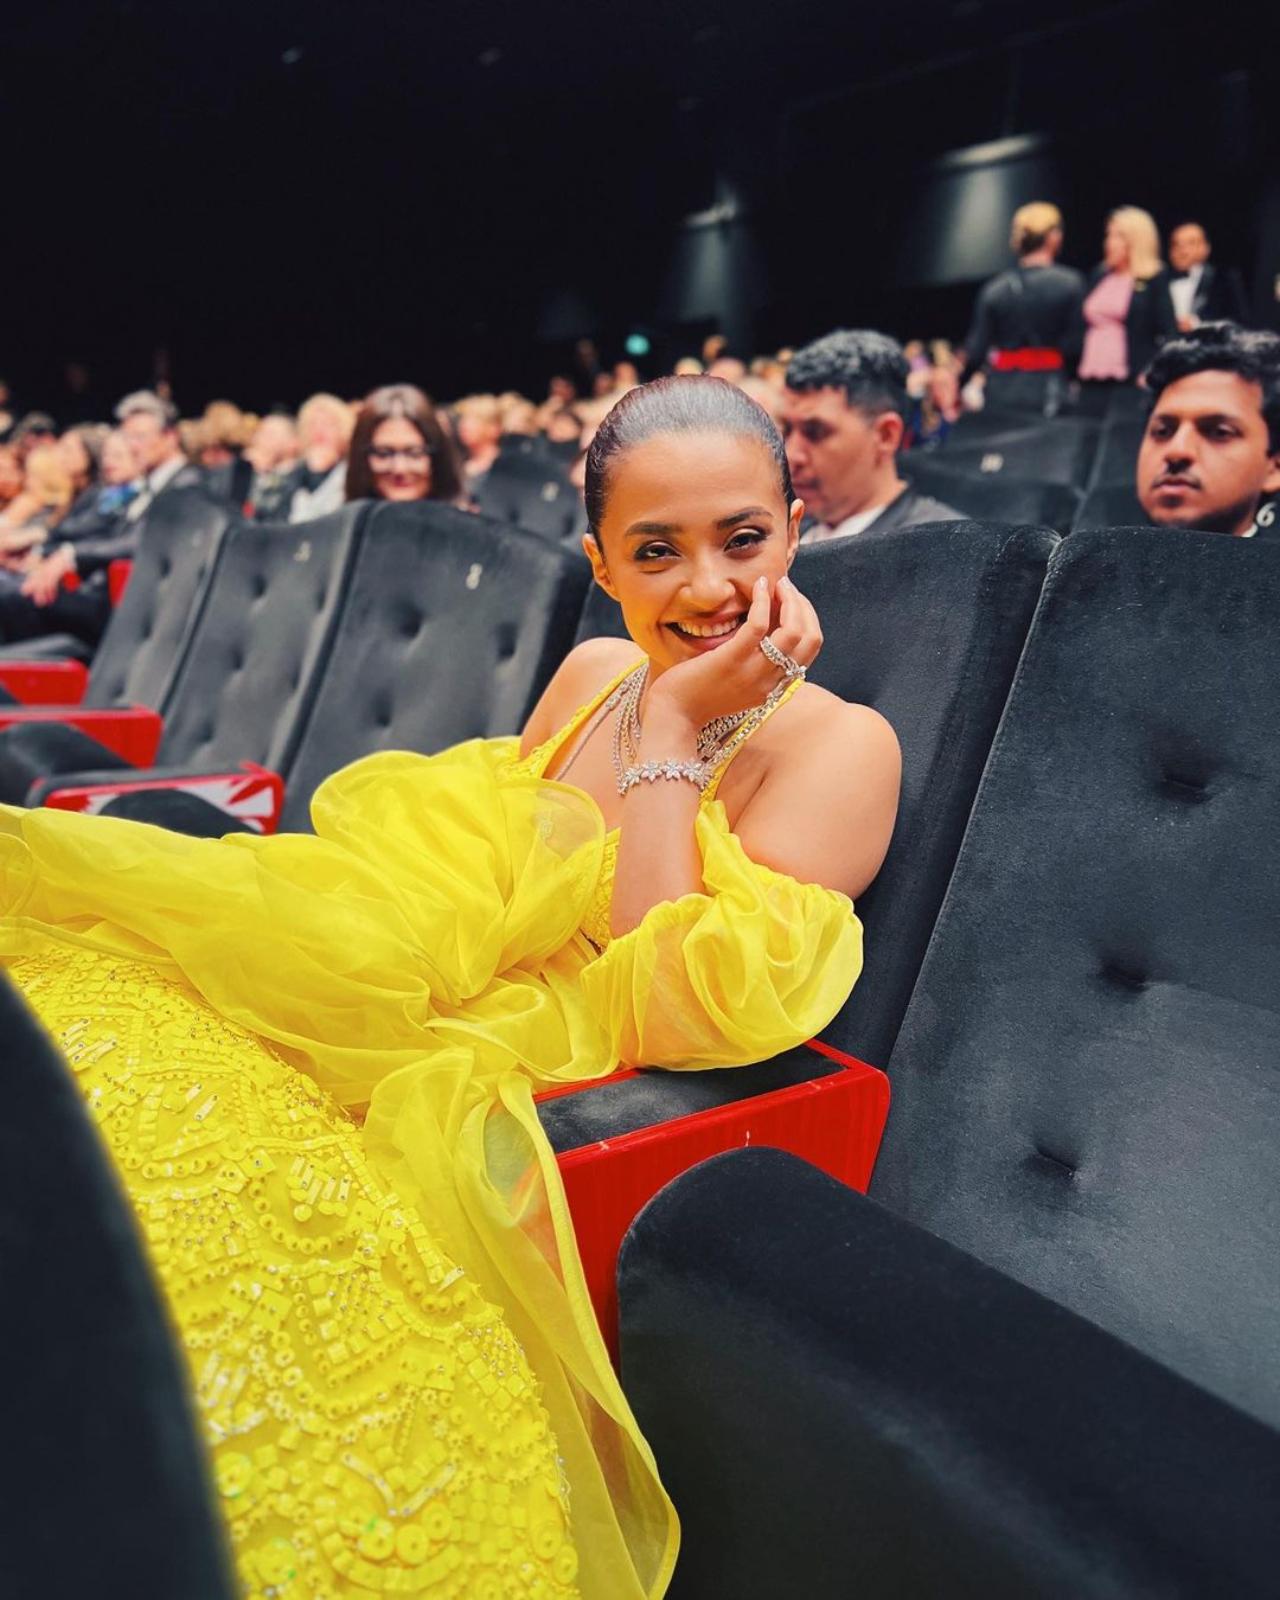 Surveen Chawla who attended the festival was among the audience who viewed the film at its worl premiere